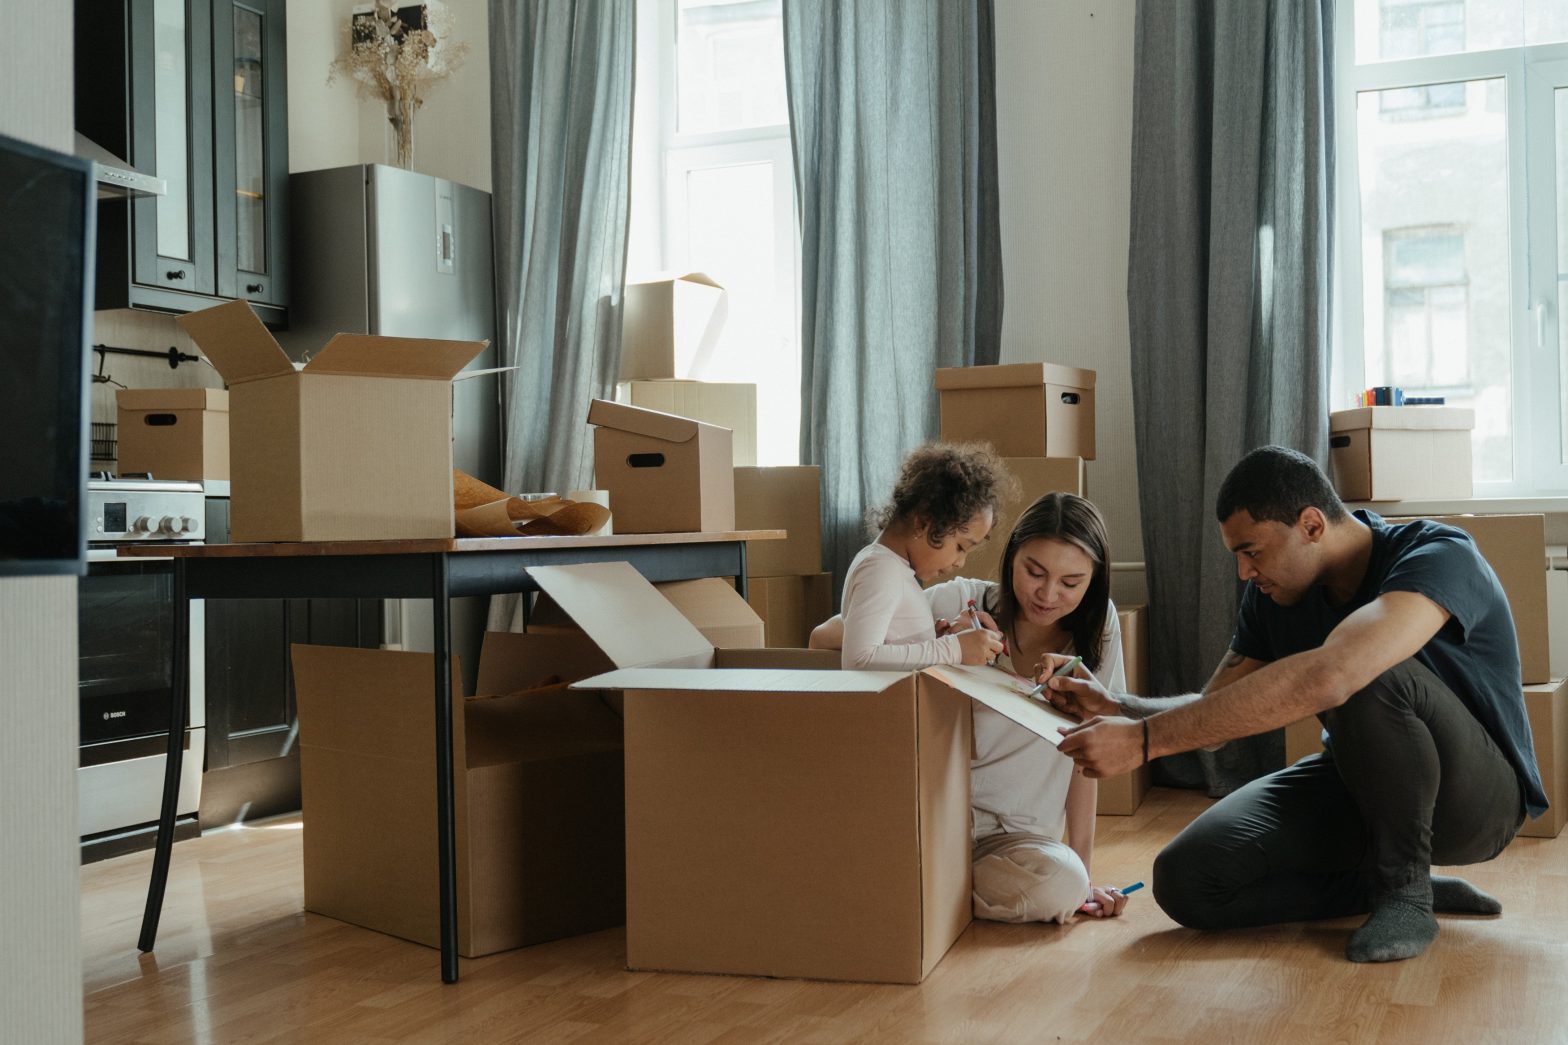 Parents and their kid are surrounded with moving boxes